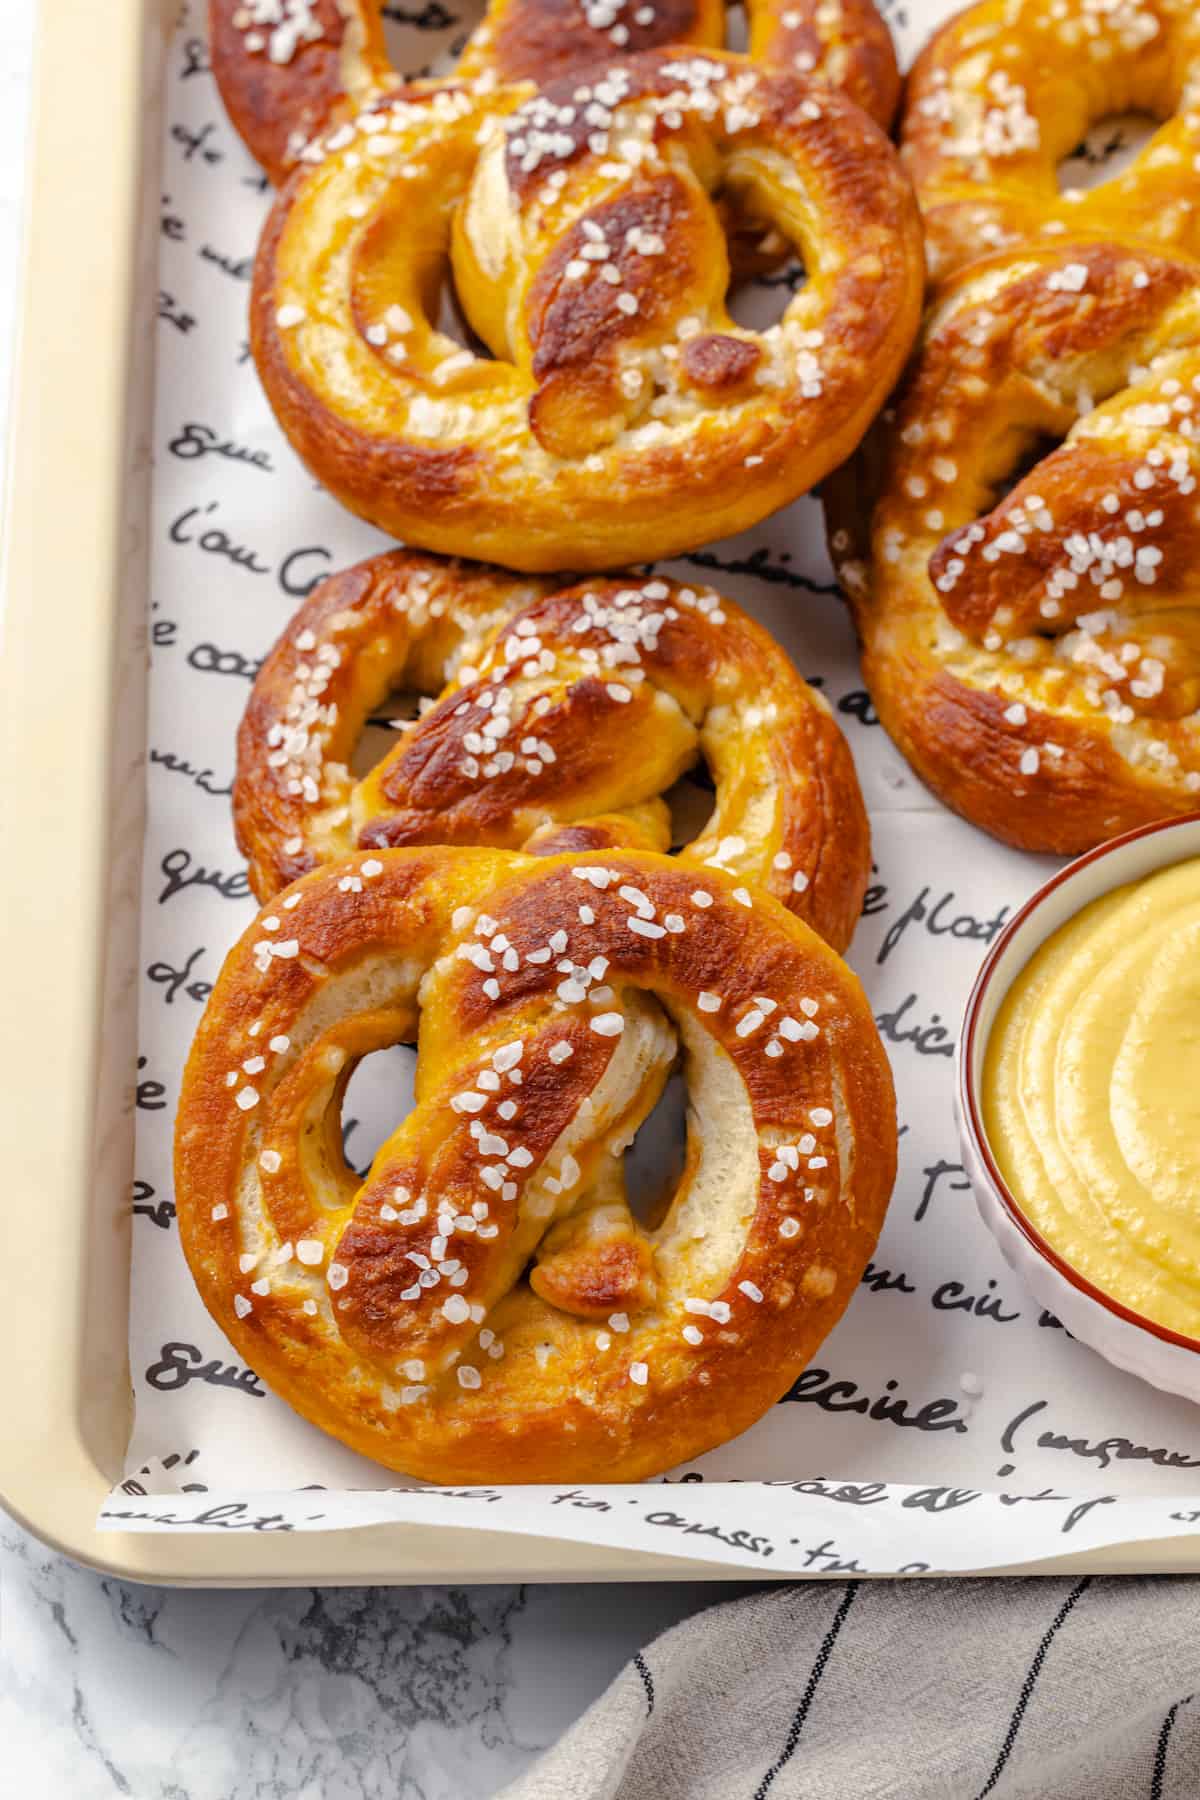 Overhead view of vegan soft pretzels on tray